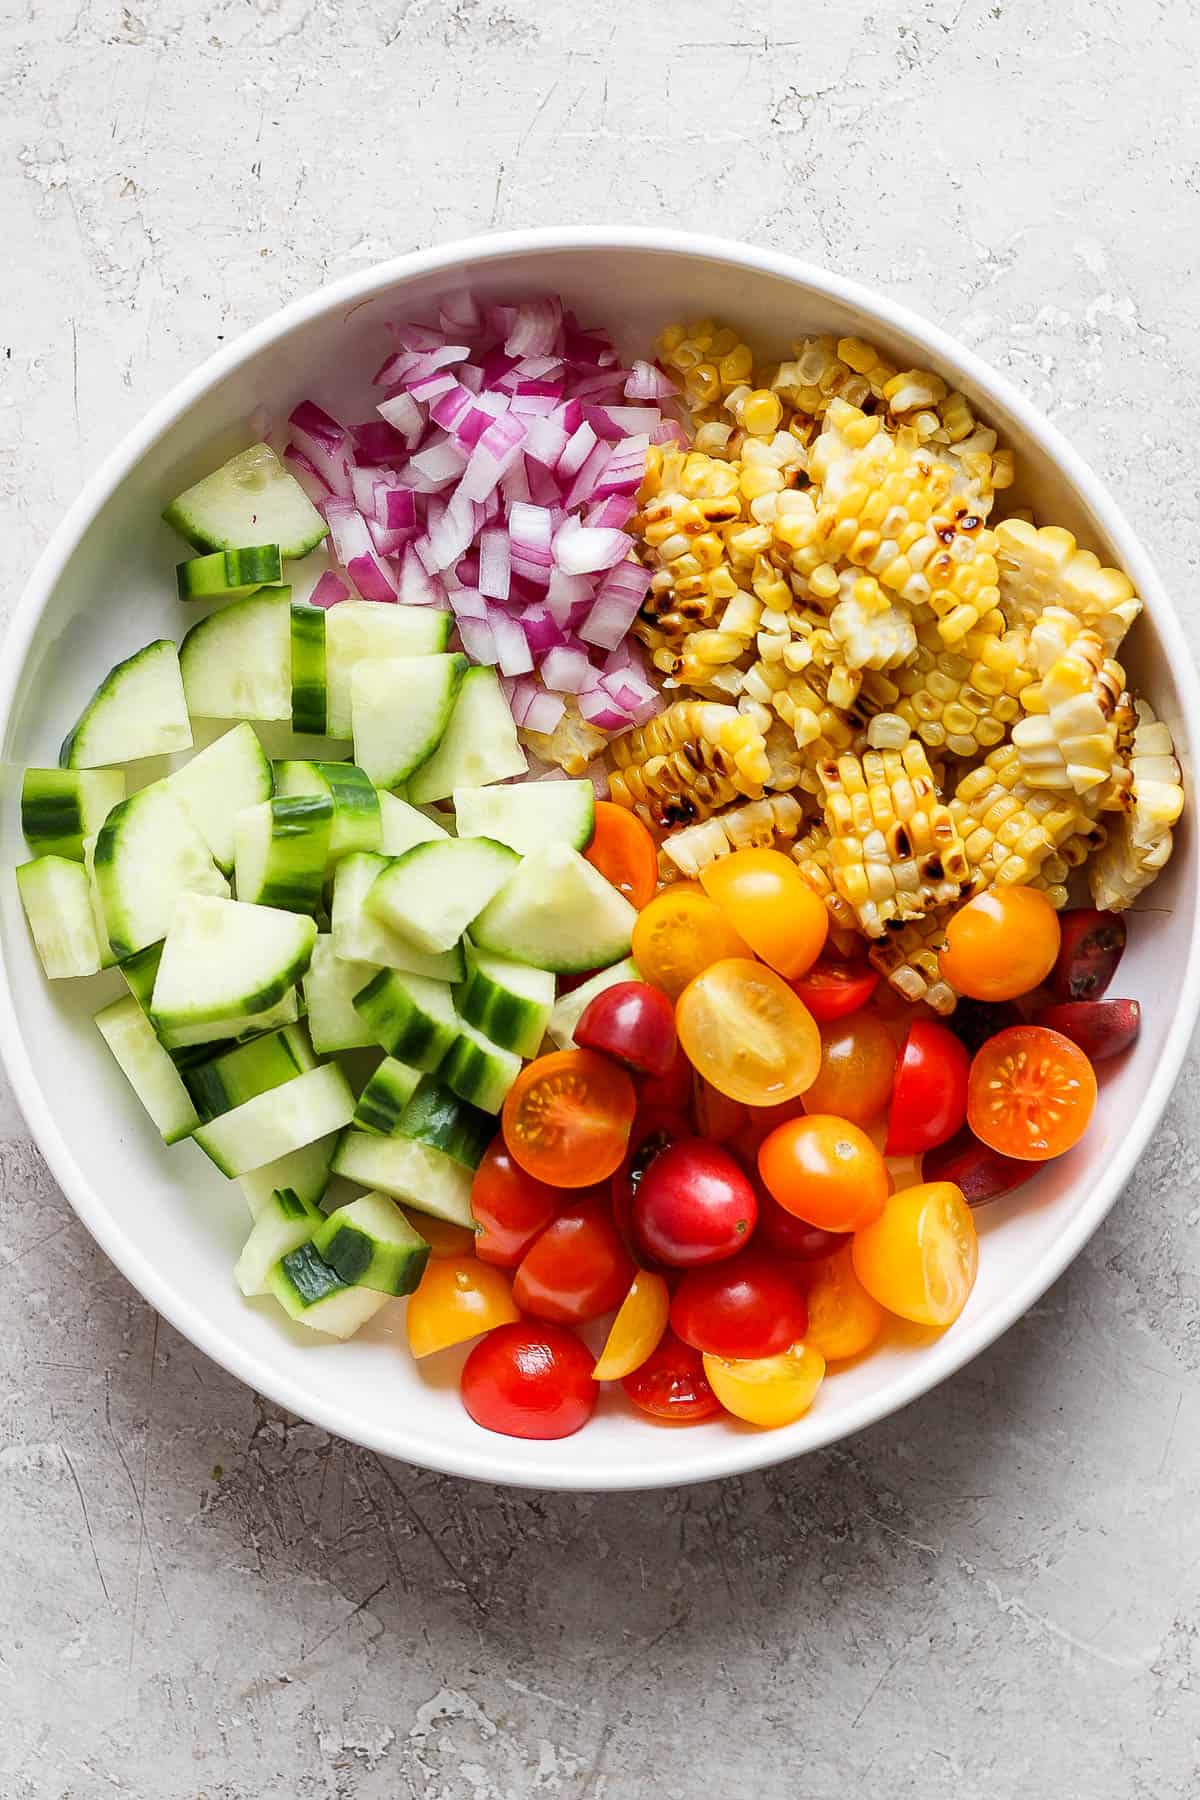 A large white bowl of cucumbers, red onion, tomatoes, and the corn cut off the cobs.